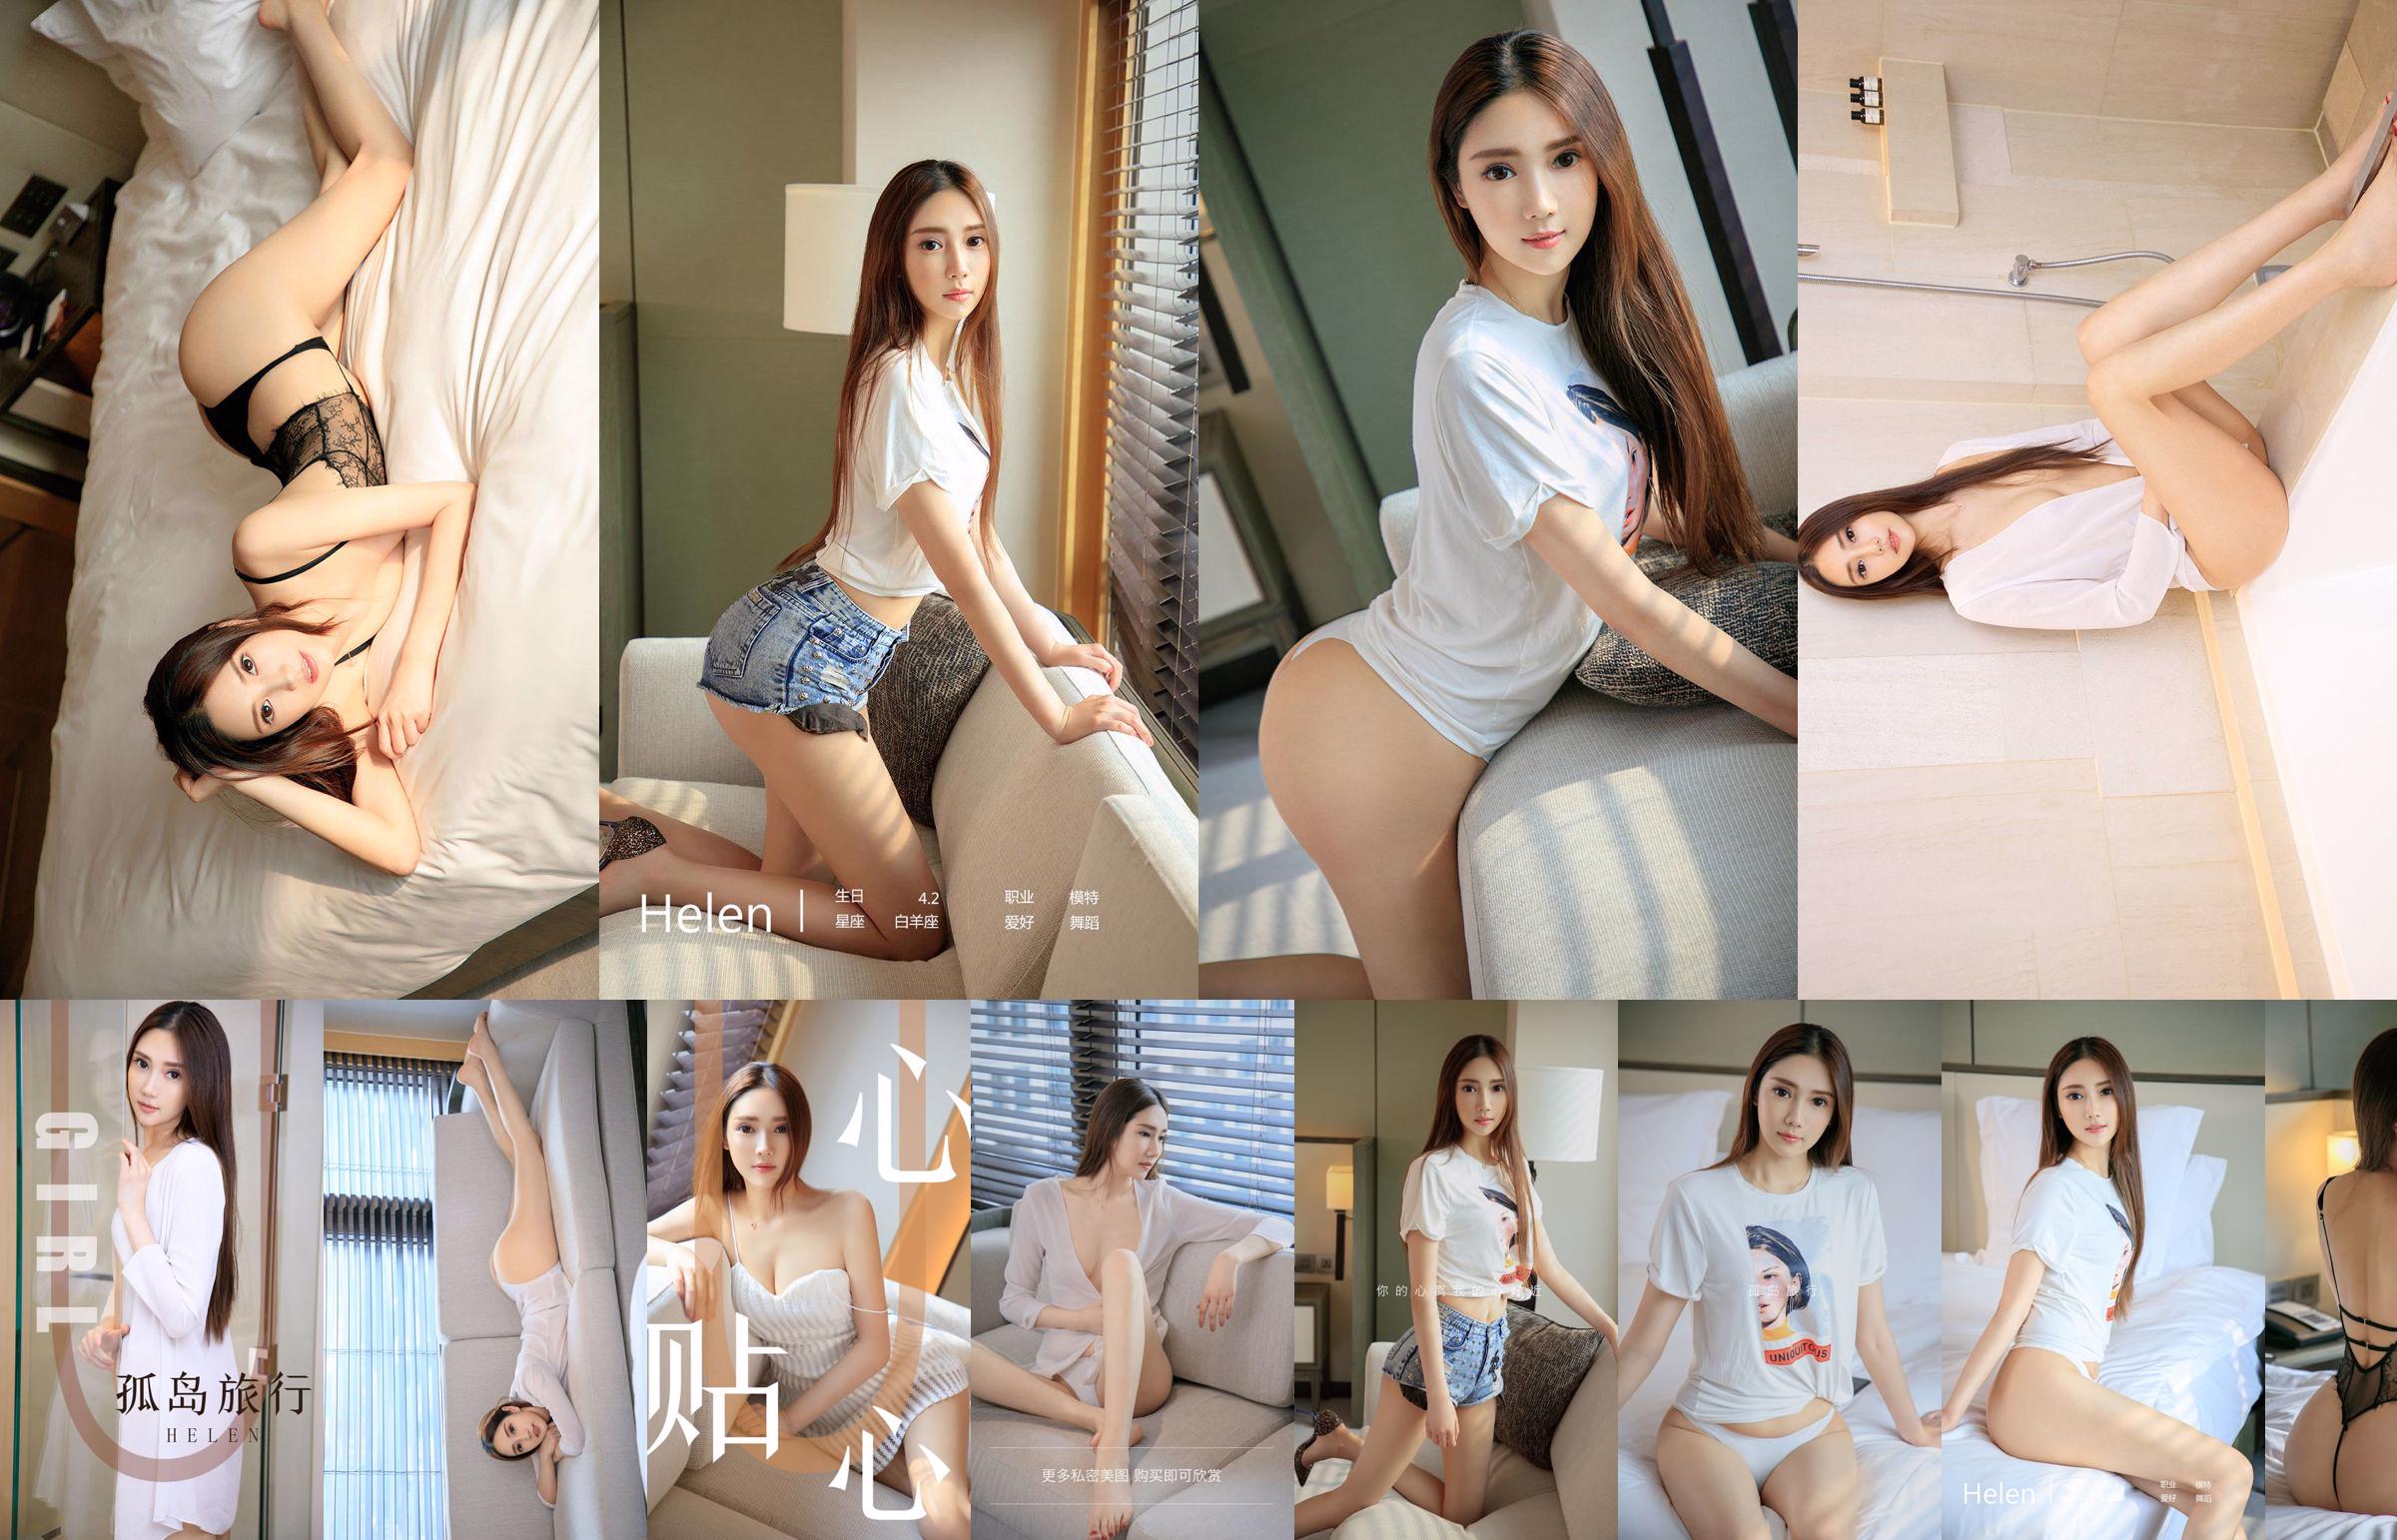 Model Helen "Lonely Island Travel" [Yougo Circle Love Stunner] No.1580 No.e80a02 Page 3